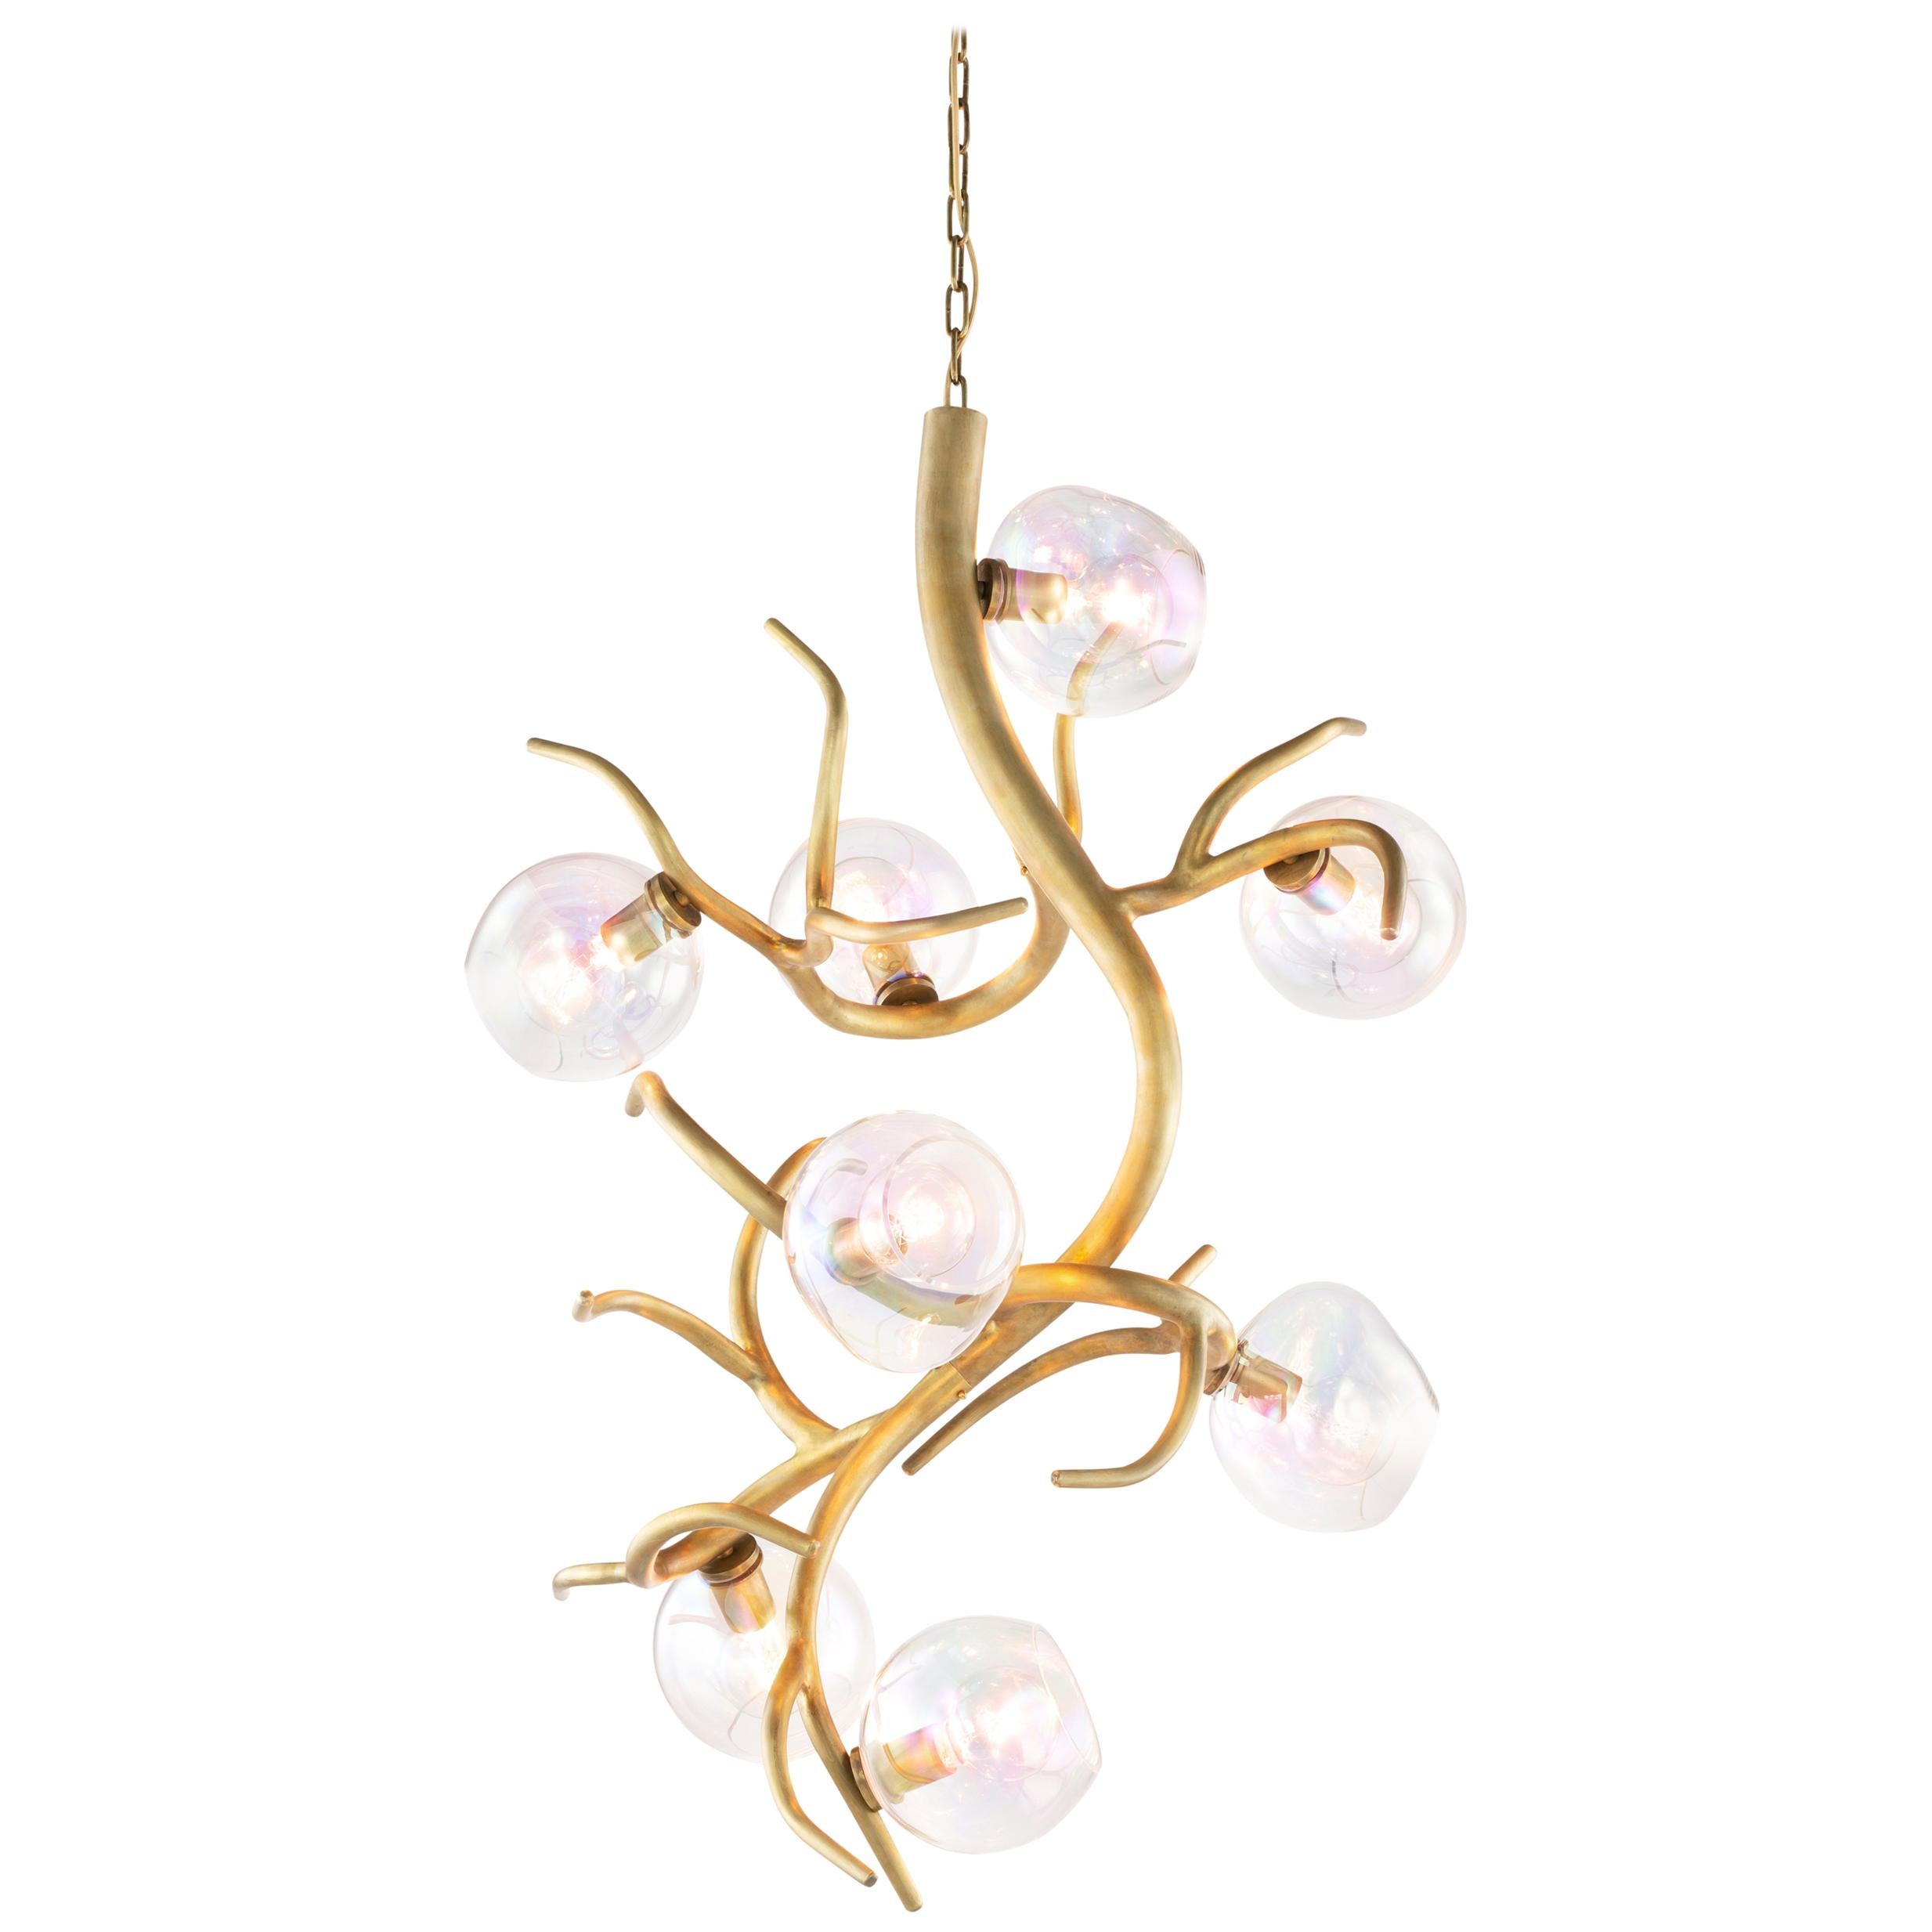 Modern Pendant with Colored Glass in a Brass Burnished Finish, Ersa Collection For Sale